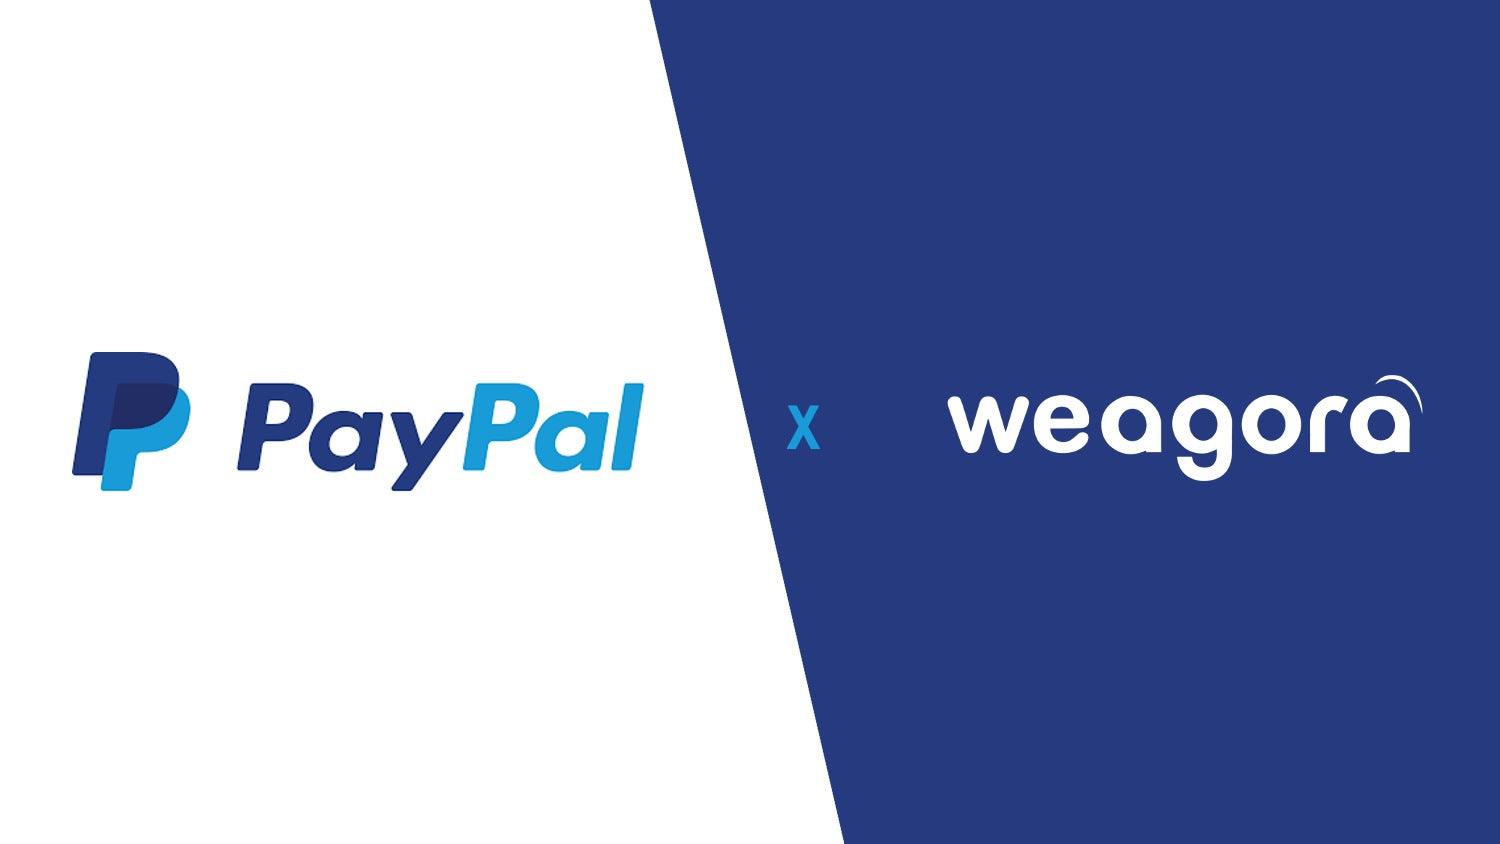 Shop now, pay later with PayPal on Wegorà - Weagorà